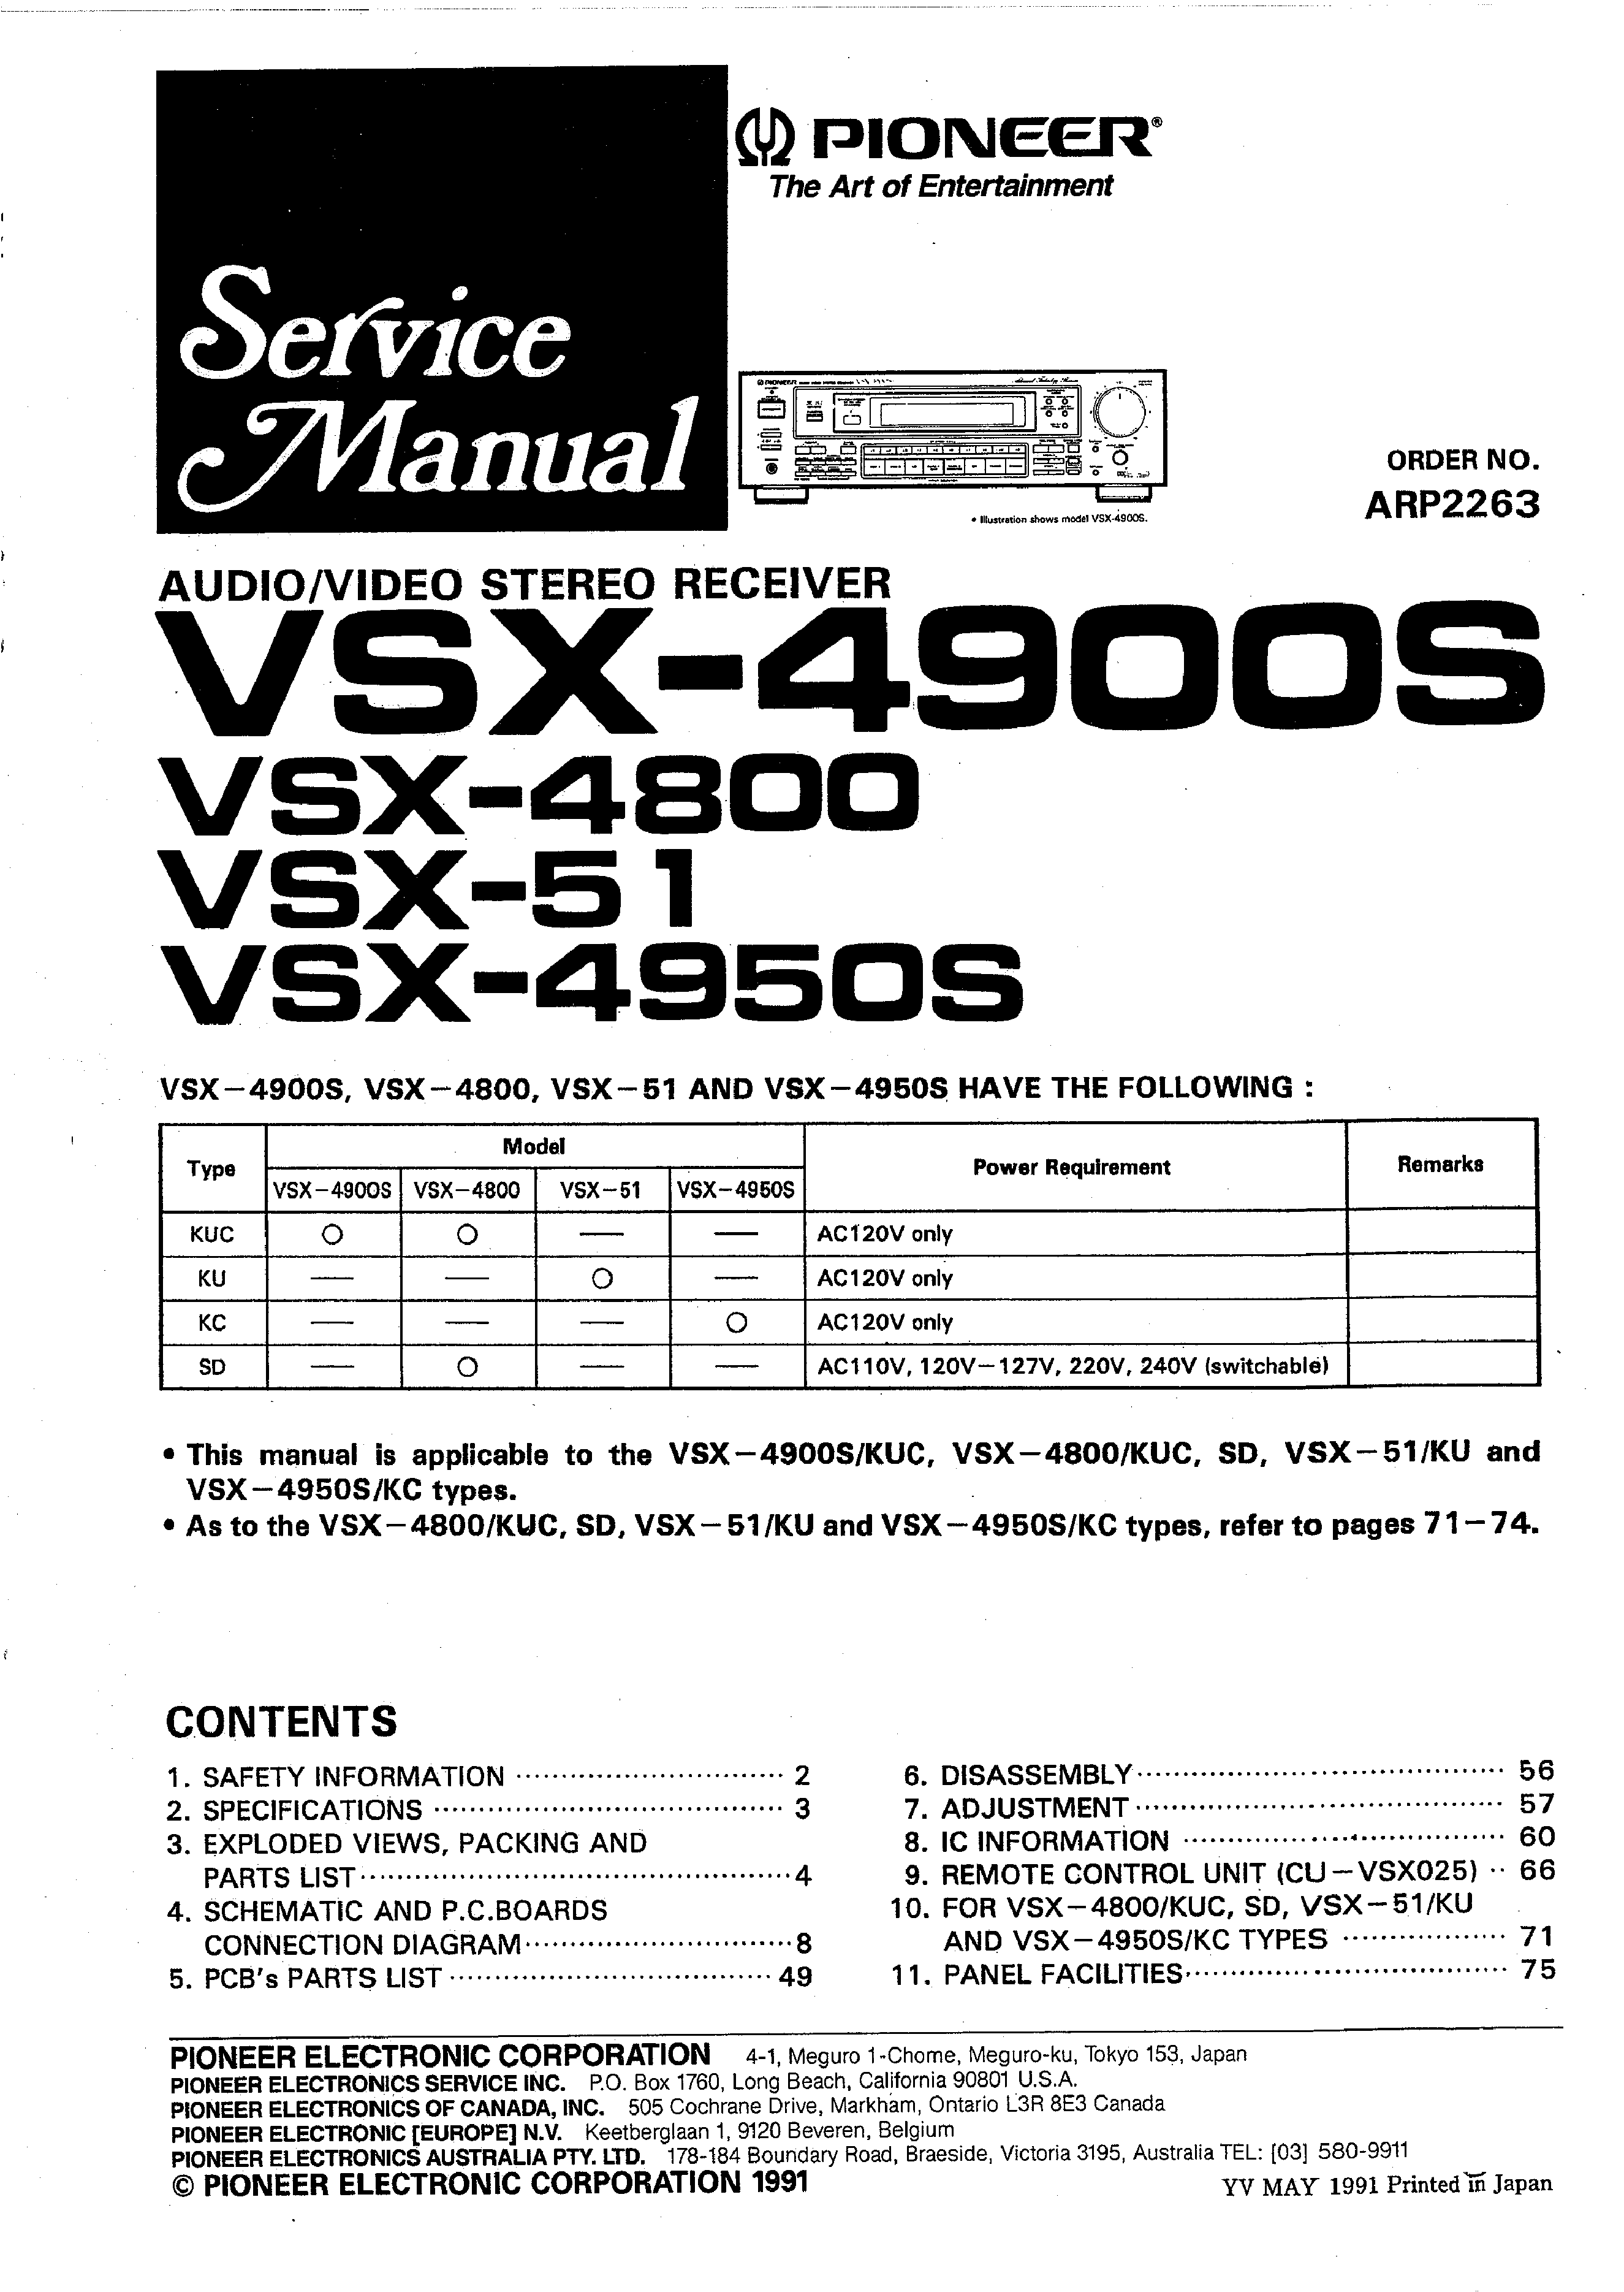 Service Manual for PIONEER VSX-451 - Download